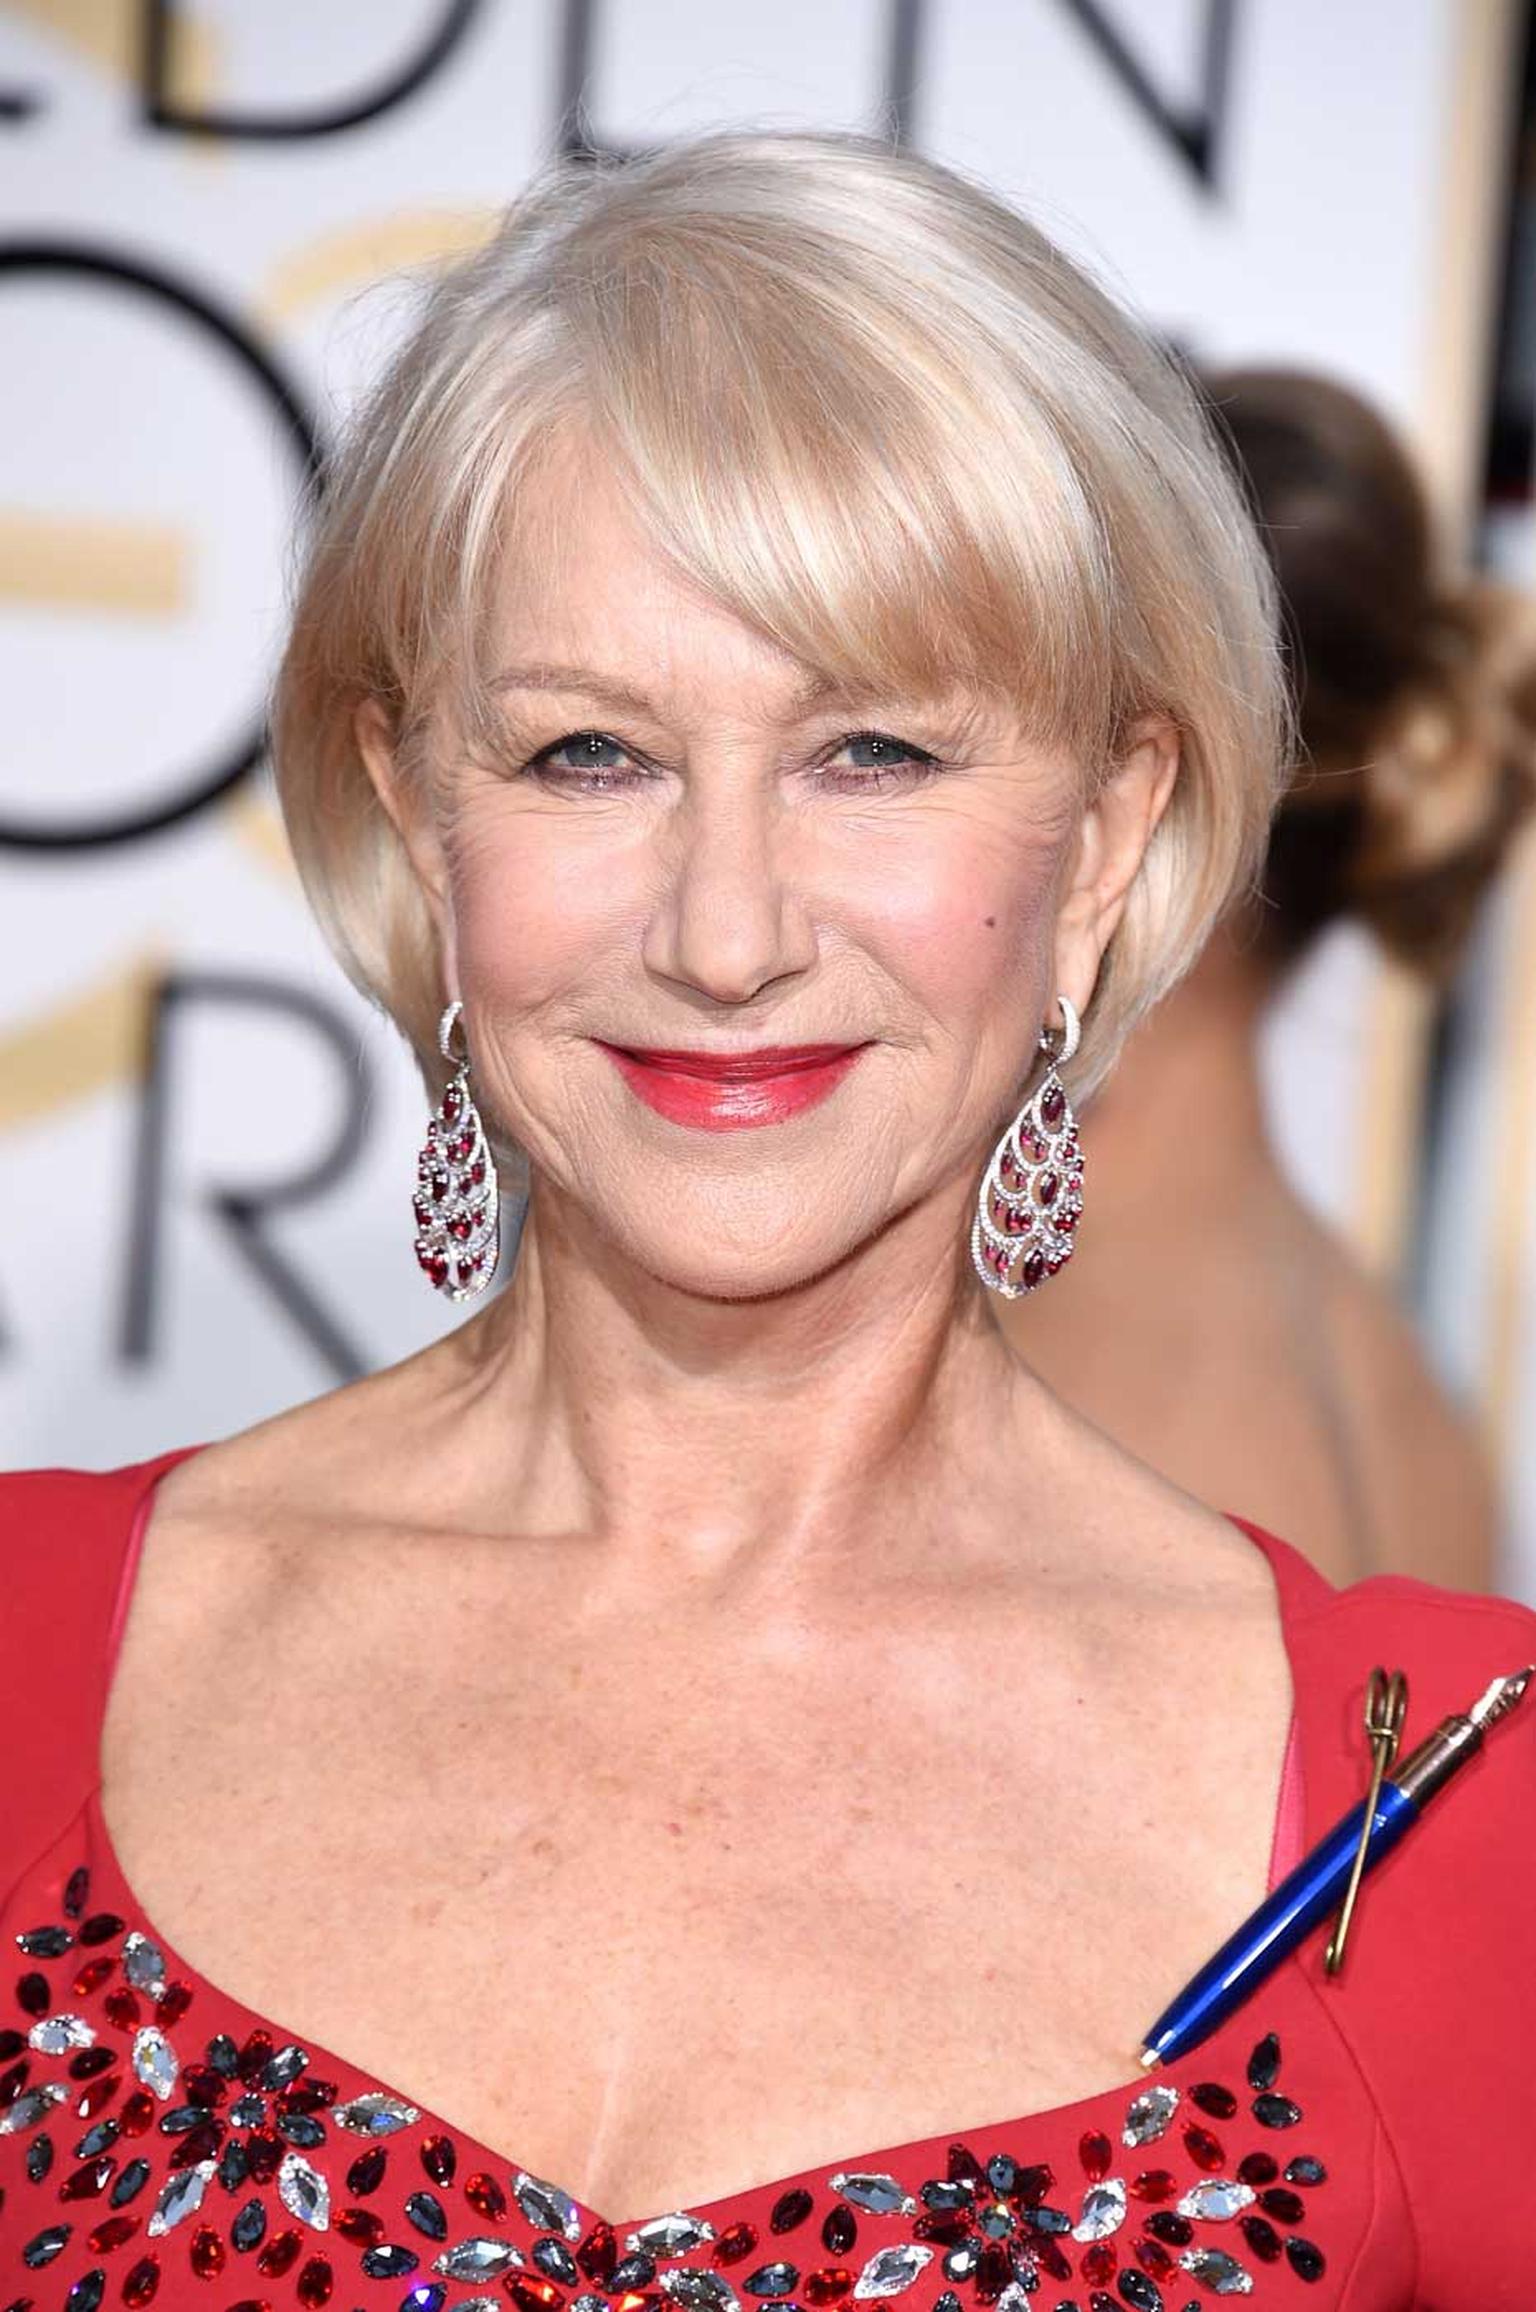 Nominated for Best Actress in a Motion Picture, Britain's Helen Mirren wore Chopard Red Carpet Collection earrings at the 2015 Golden Globe Awards.